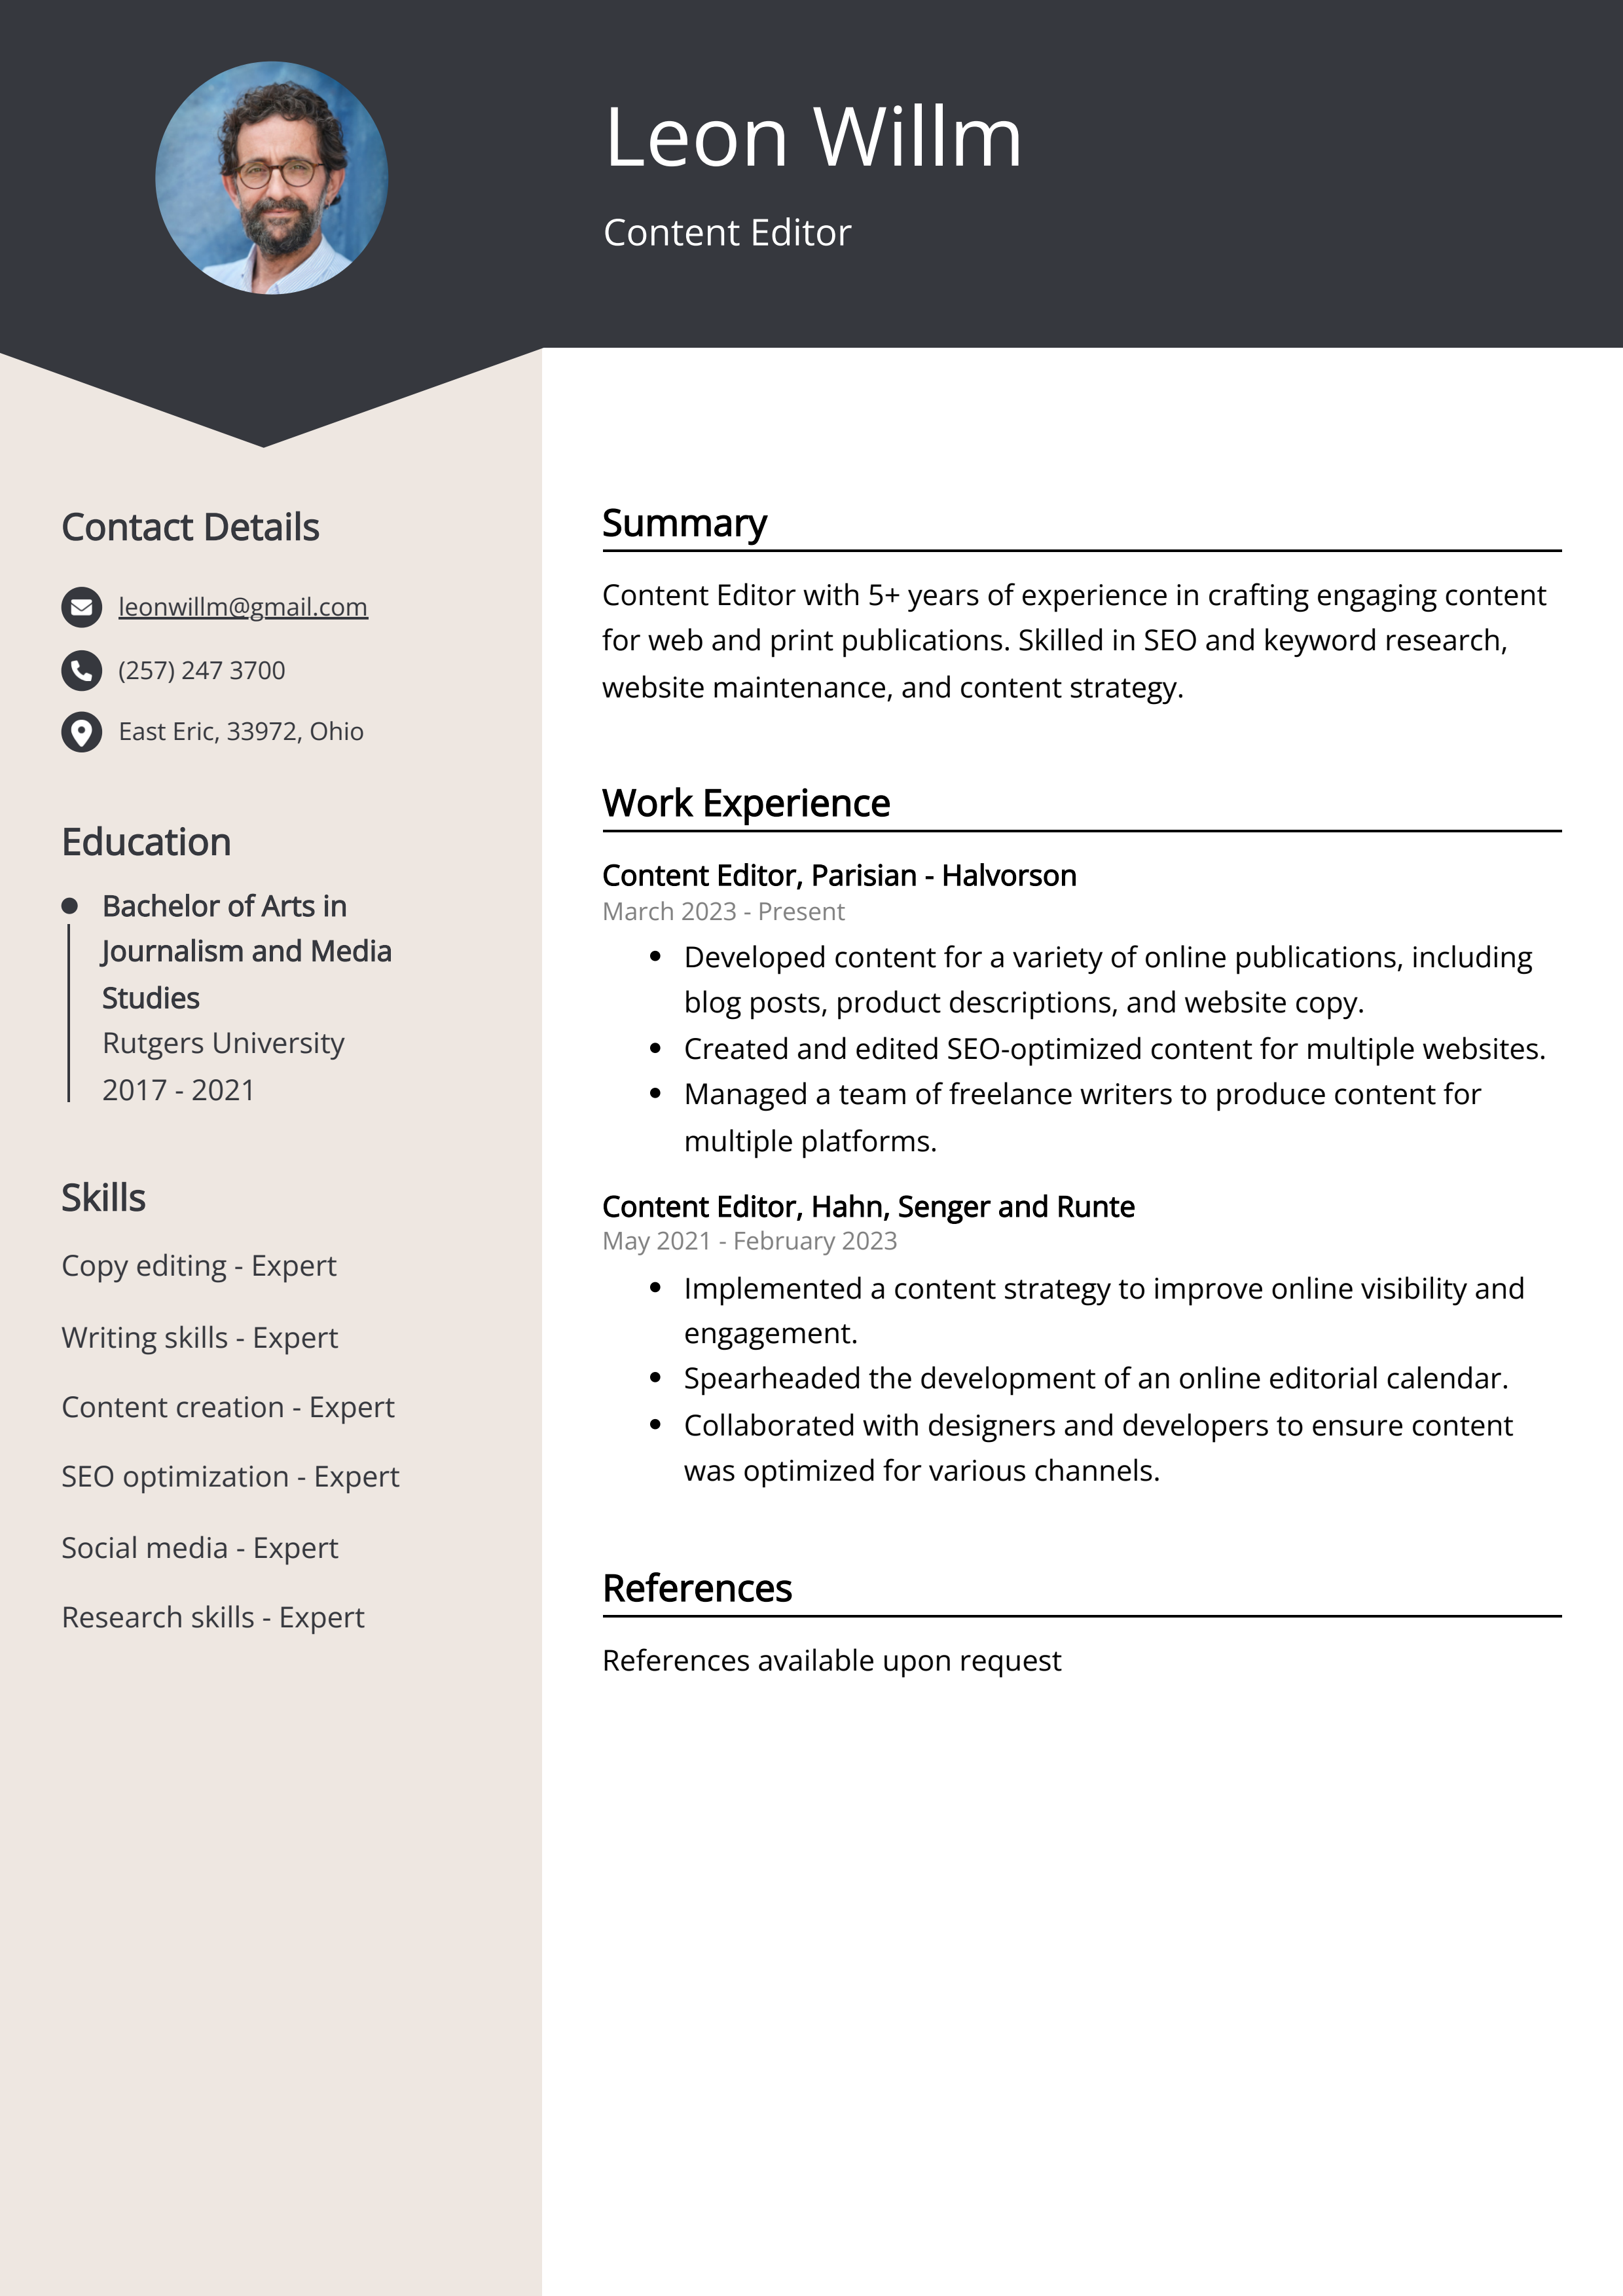 Content Editor Resume Example